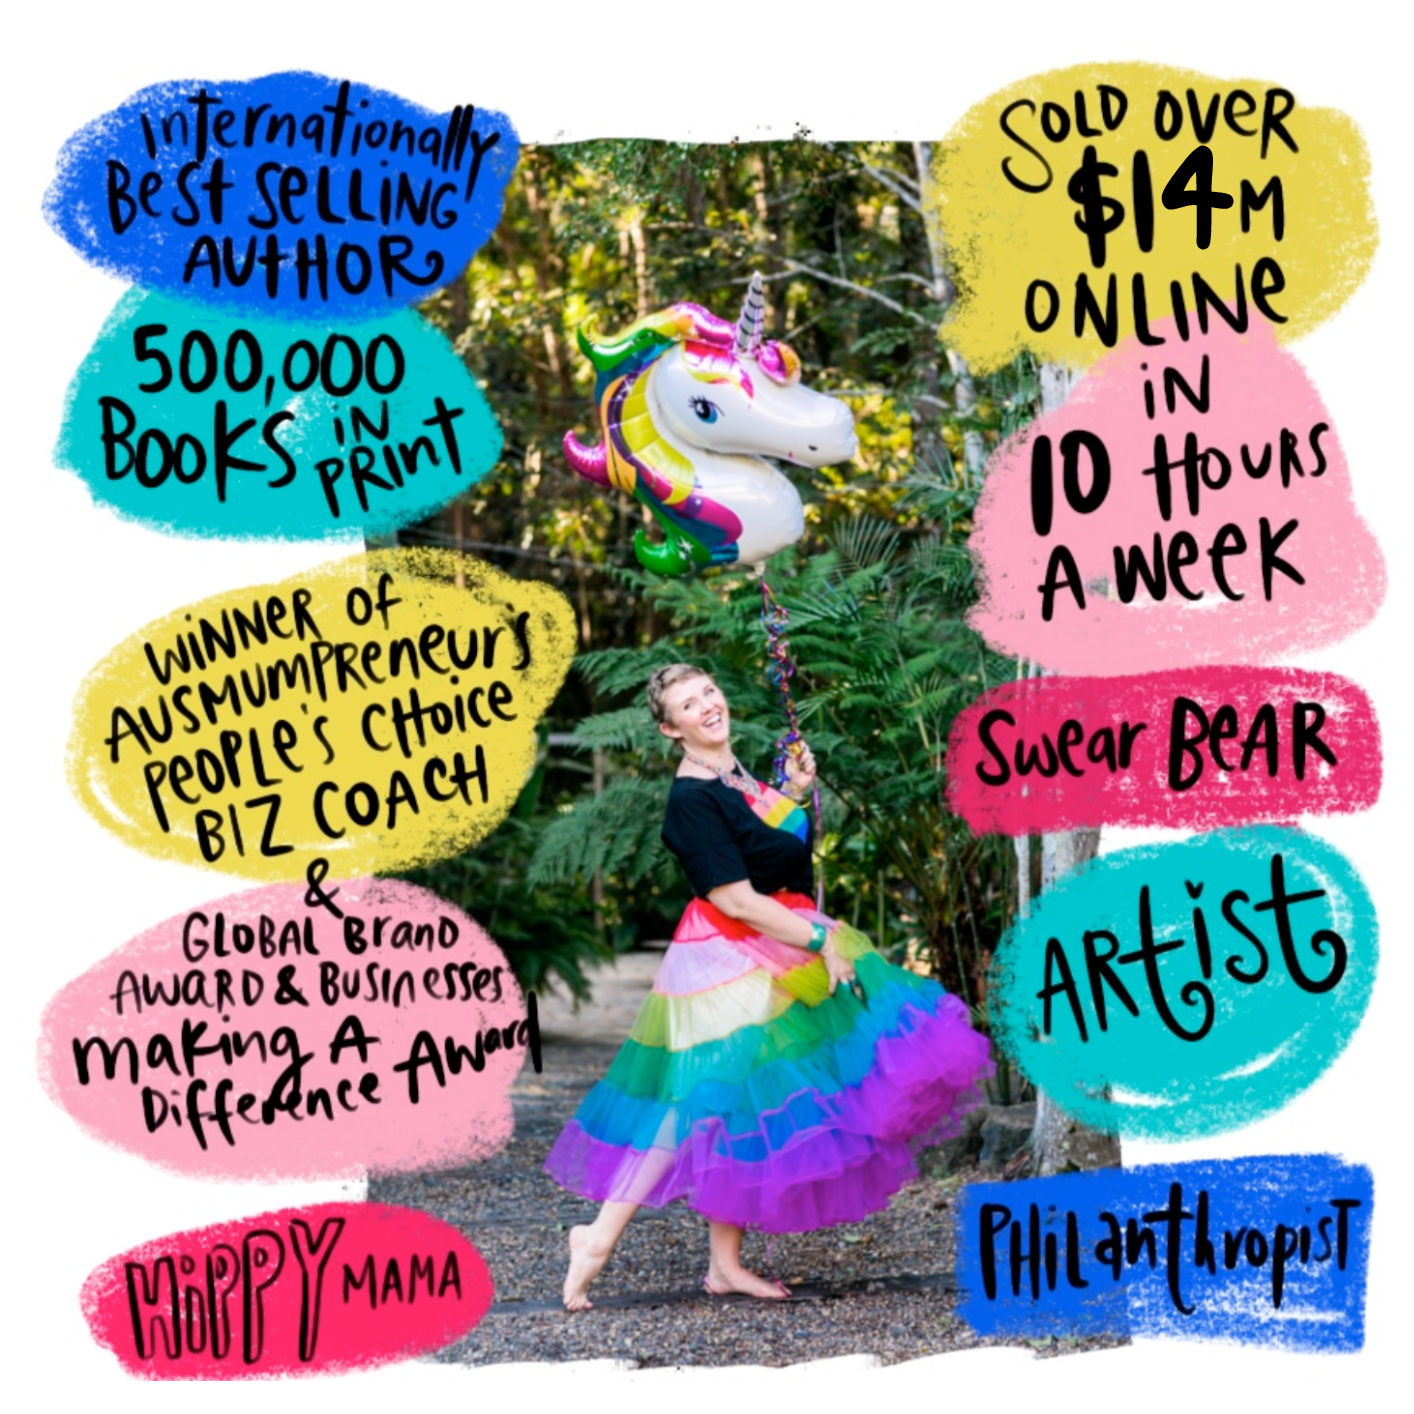 A photo of Leonie in the forest, she is wearing a rainbow tulle skirt and holding a unicorn balloon. Around her are 10 crayon style blocks with the following texts - Internationally Best Selling Author - 500,000 Books in Print -Winner of Ausmumpreneur's People Choice Biz Coach & Global Brand Award & Businesses Making a Difference Award - HIppy Mama - Sold over 14M Online - In 10 hours a week - Swear Bear - Artist -Philanthropist